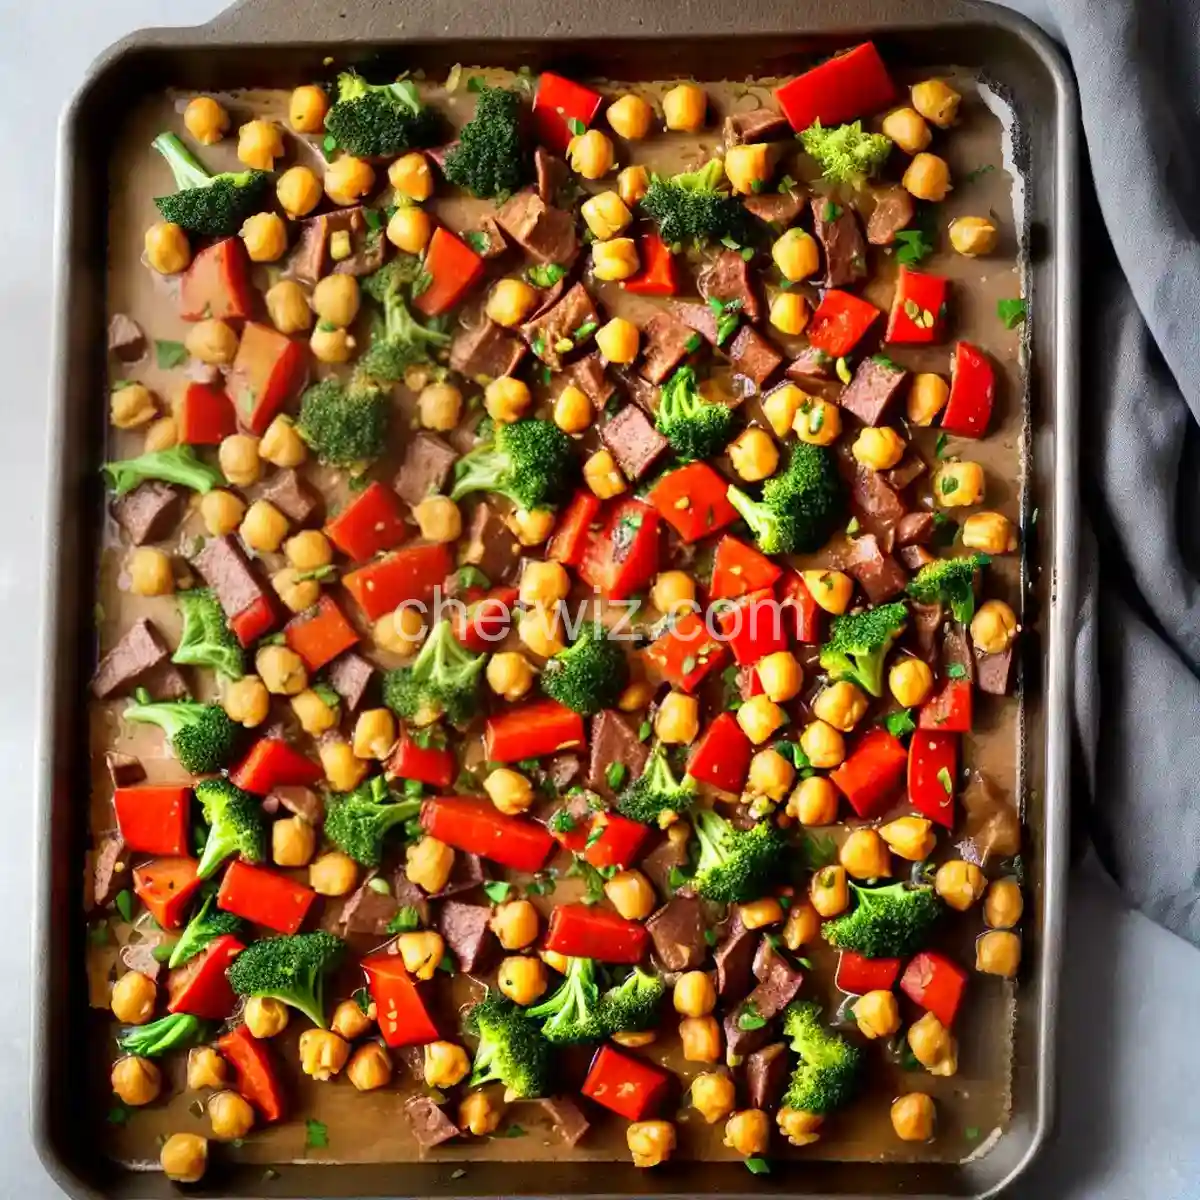 Vegetarian Sheet Pan Dinner with Chickpeas and Veggies - Recipes. Food ...